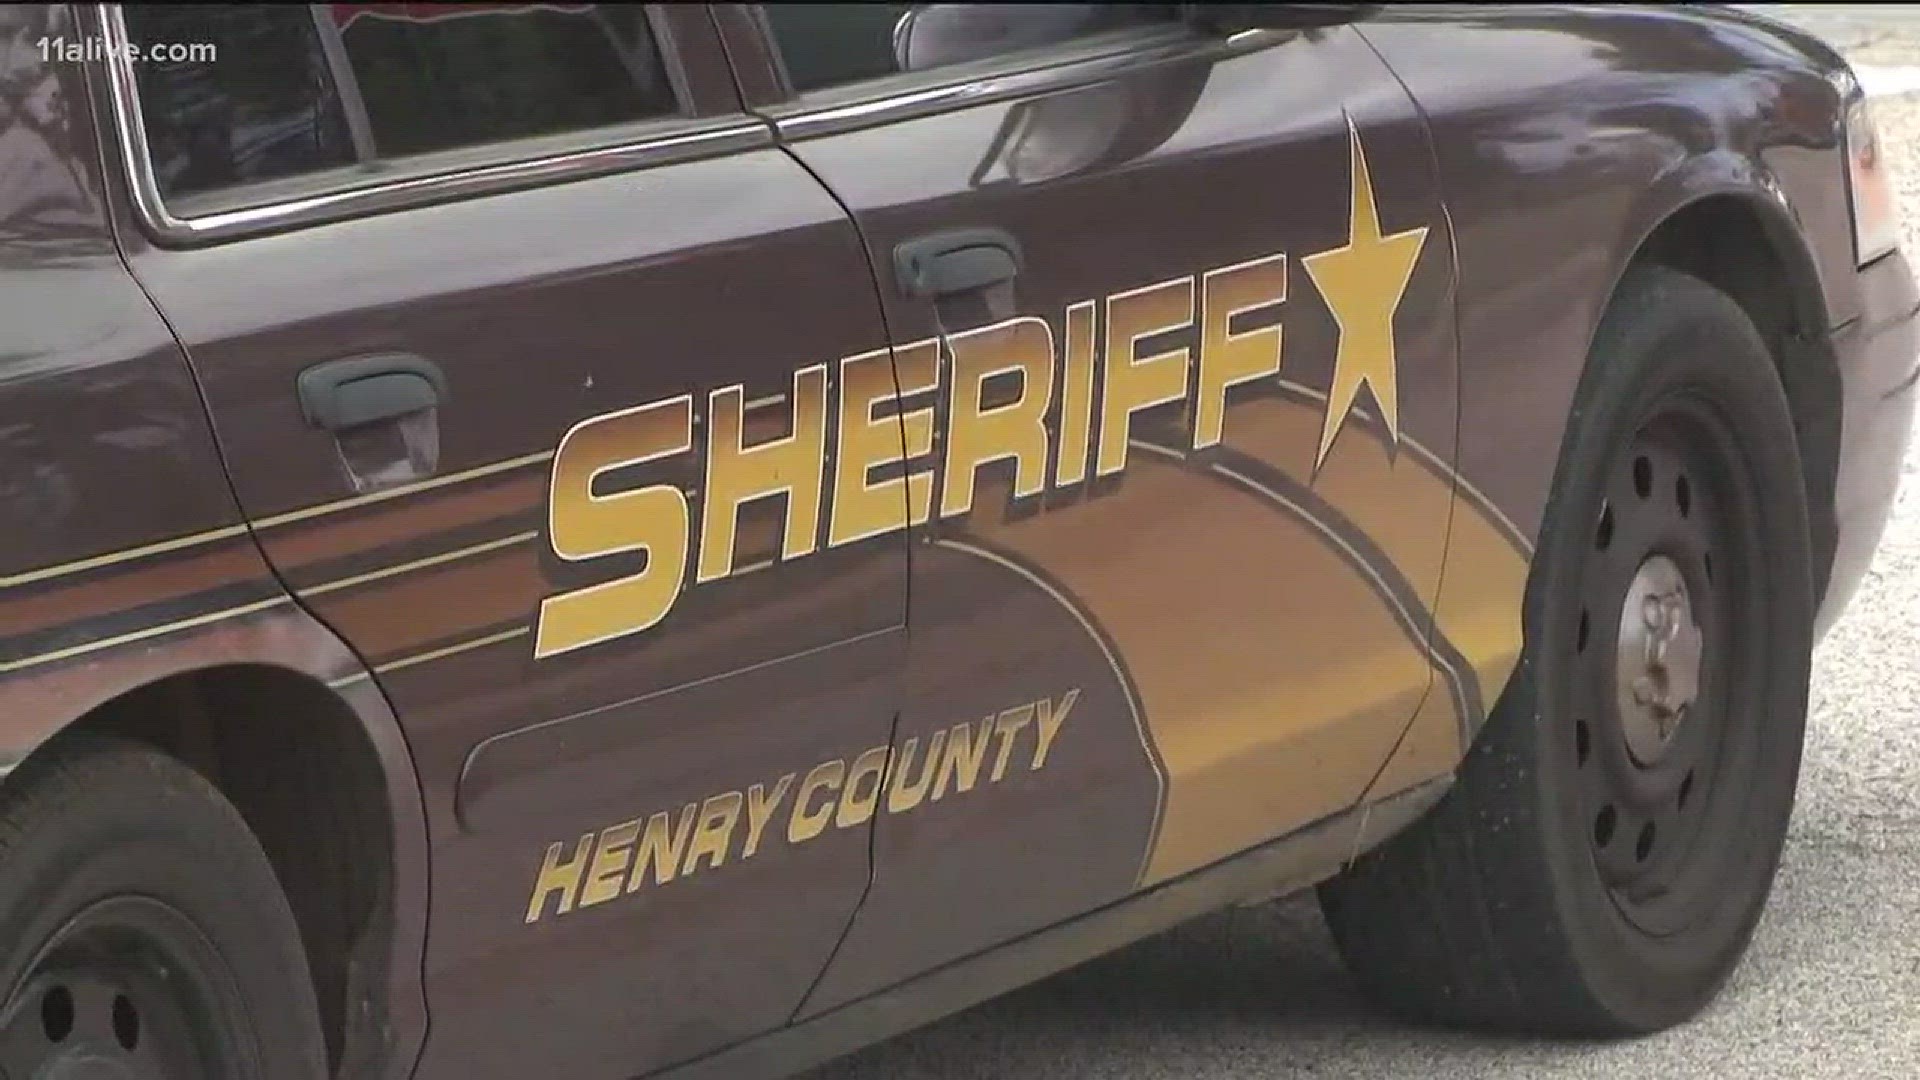 We're learning more about the moments that led up to a fatal shooting in Henry County